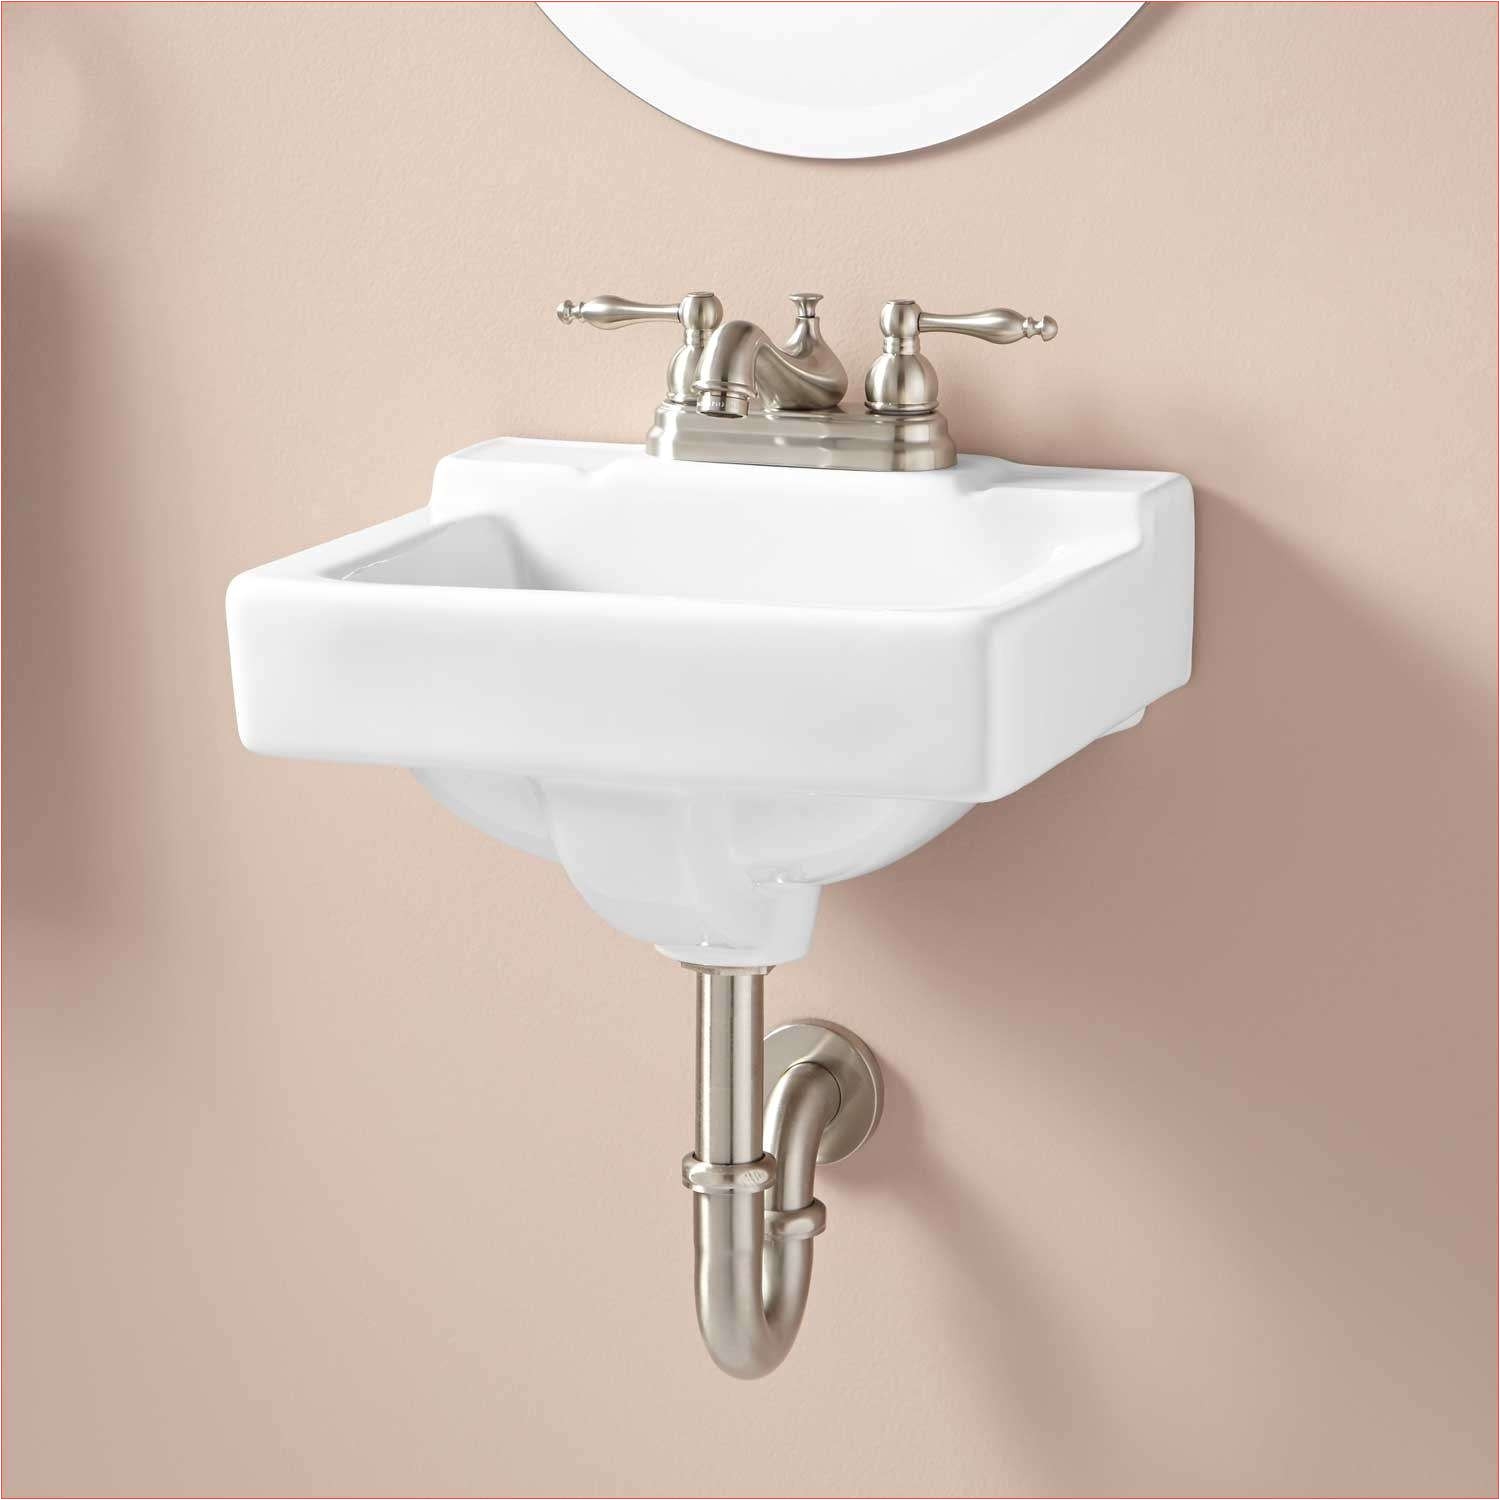 unclog shower head beautiful bathroom sink not draining new h sink unclog a drain i 0d